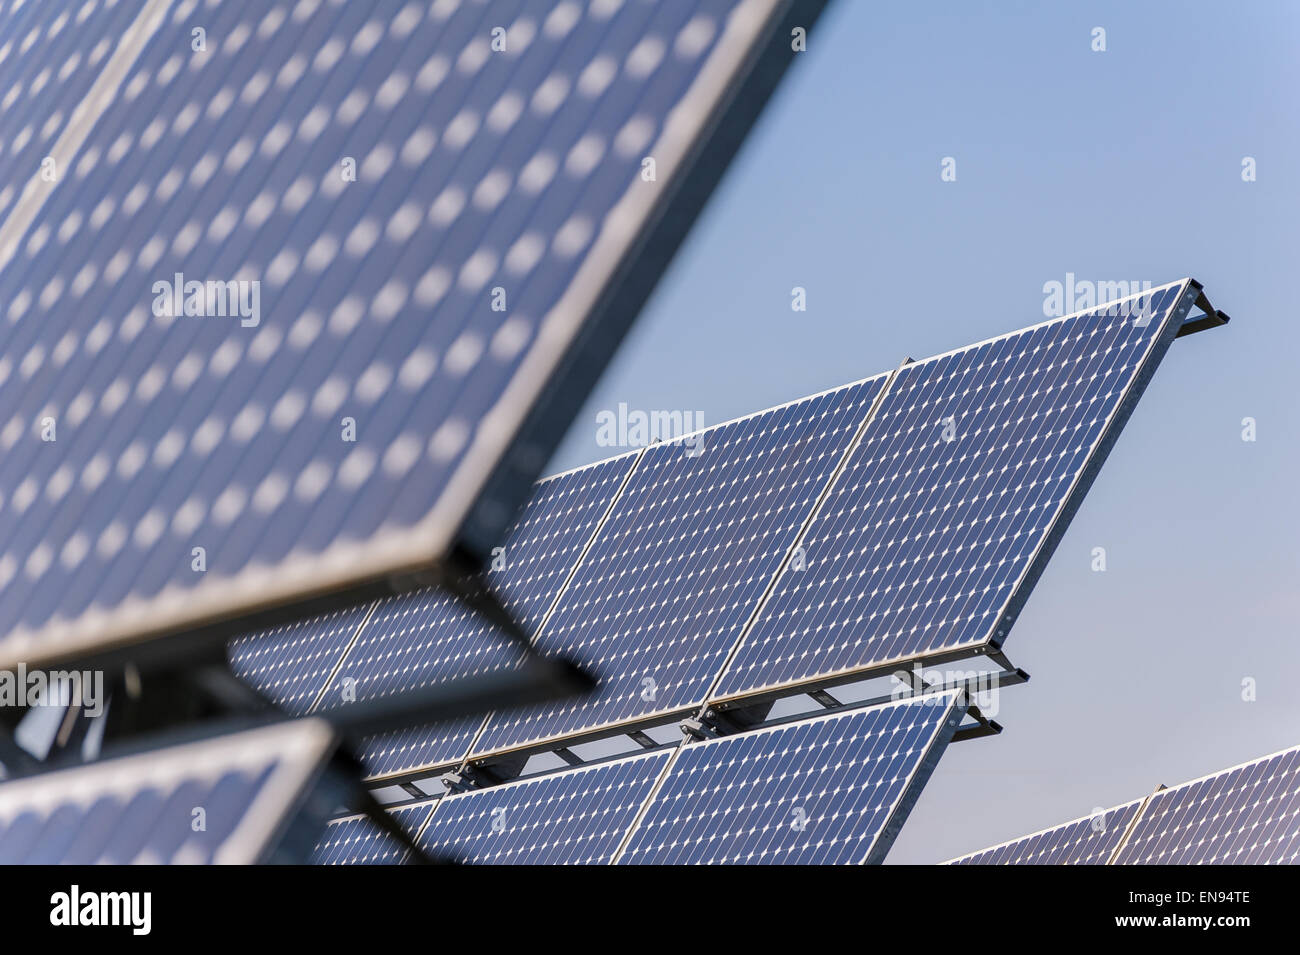 Solar panels to produce energy in an environmentally friendly manner Stock Photo